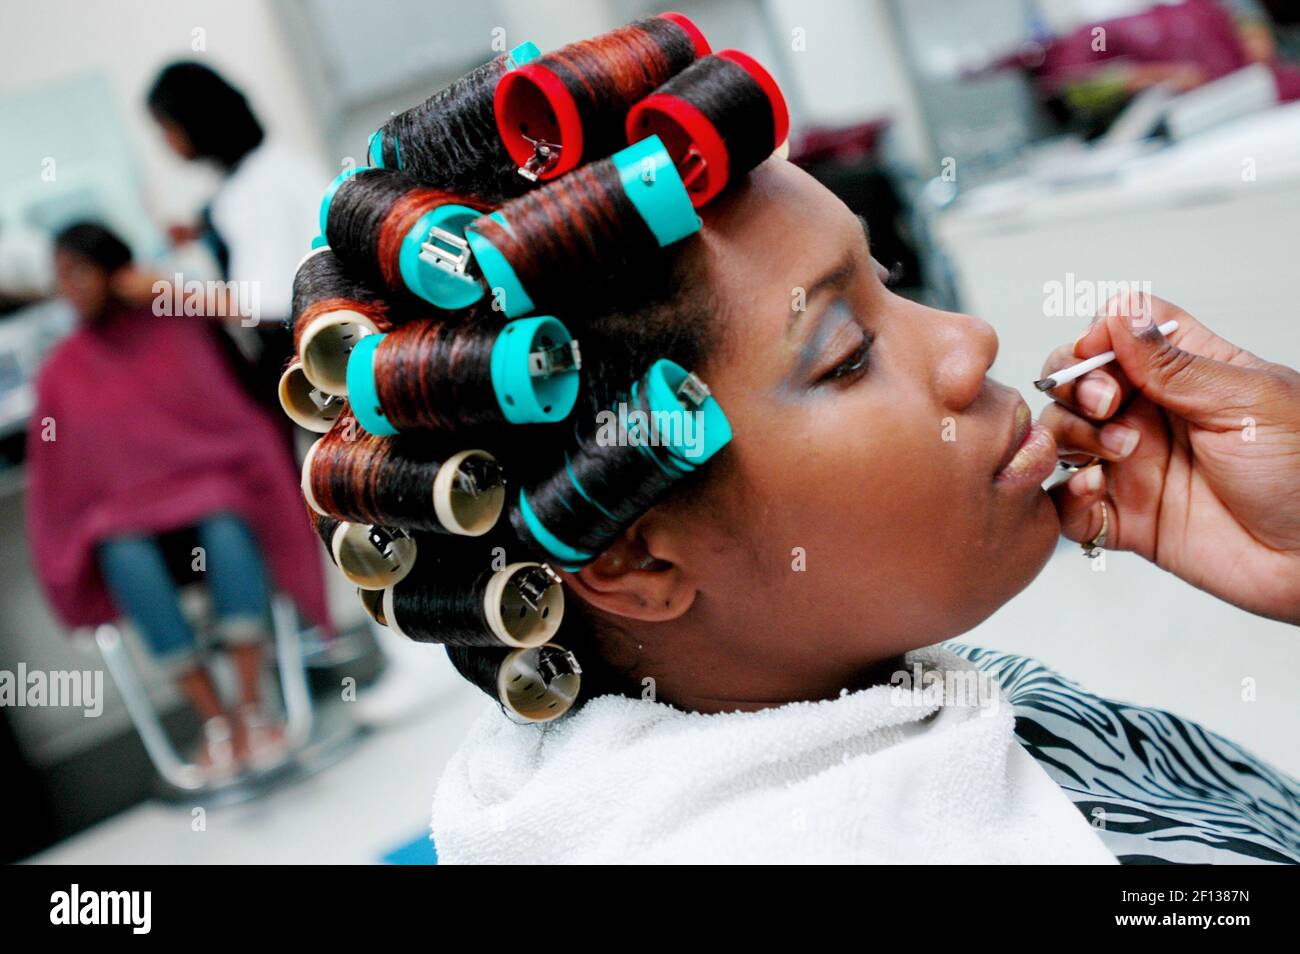 Deondra Gilbert of Charlotte receives a hair and beauty appointment at the  Dudley Beauty School campus in Charlotte, North Carolina. Beauty schools  offer salon appointments at more affordable prices, benefiting the consumer